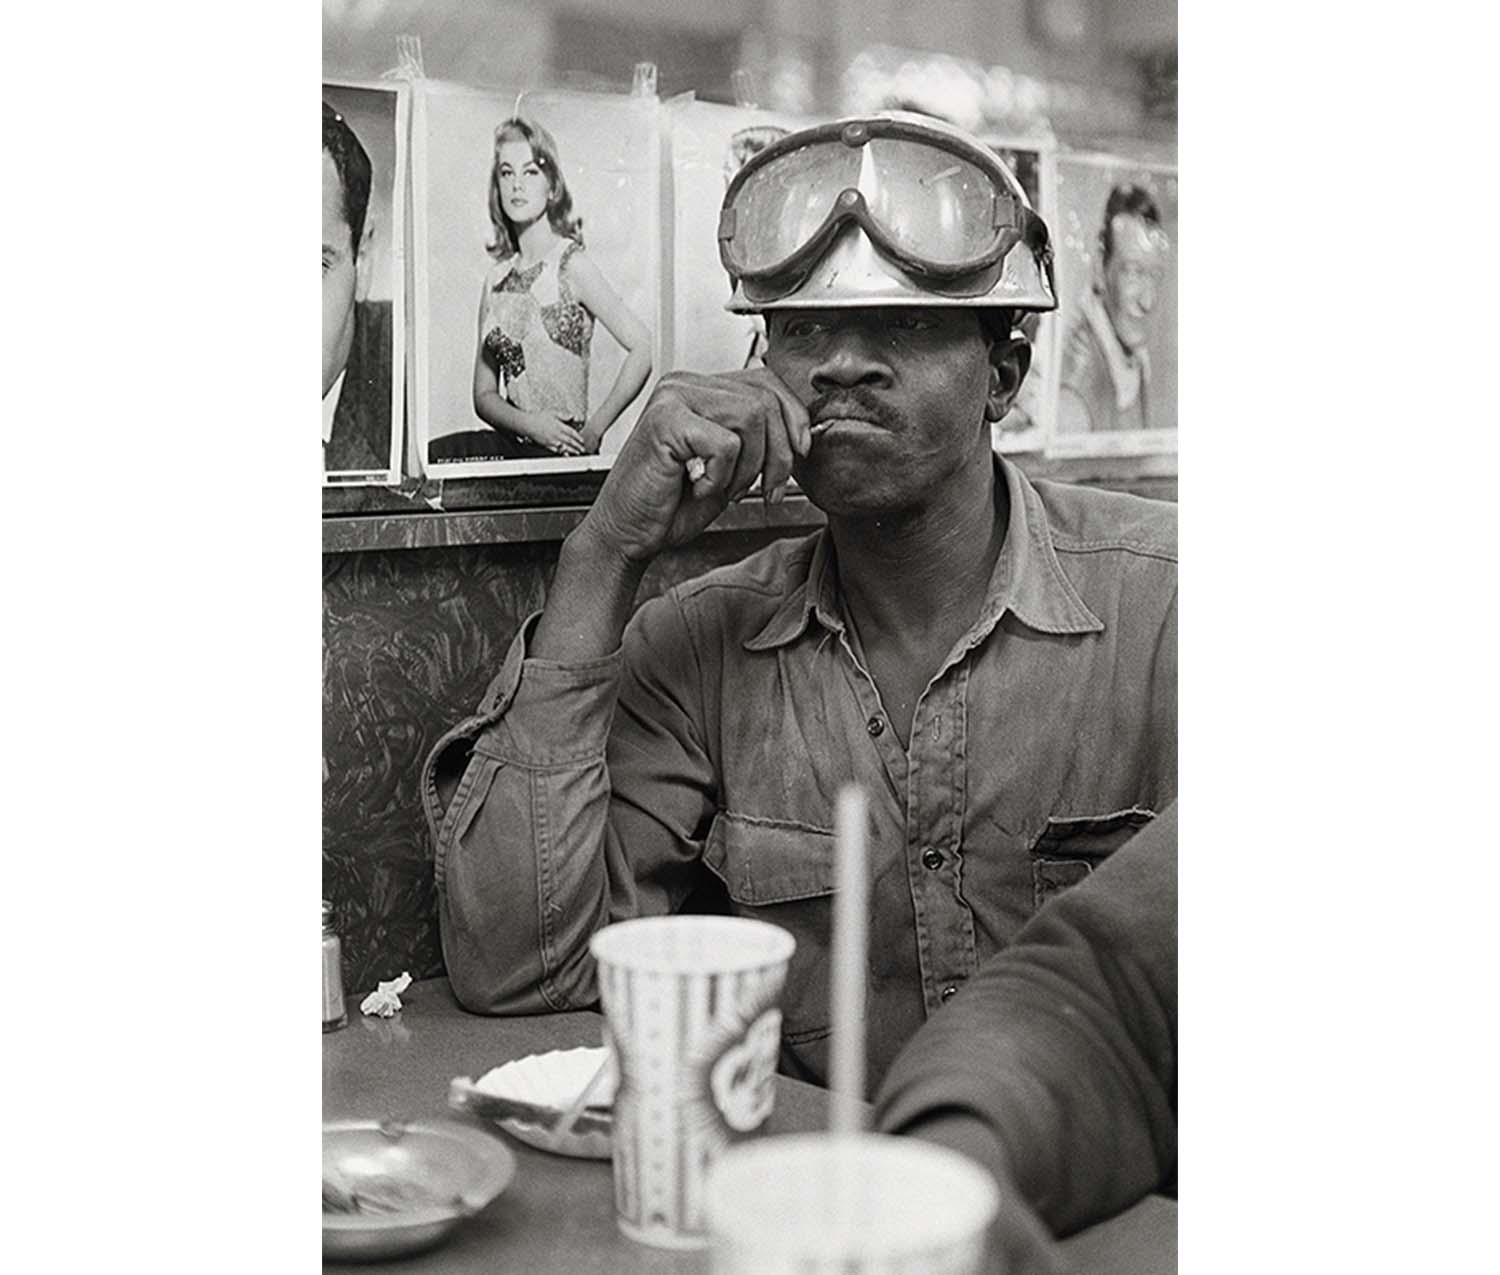 man in work clothes with hard hat and protective glasses on top of hat, seated at table with celebrity portrait photographs in background